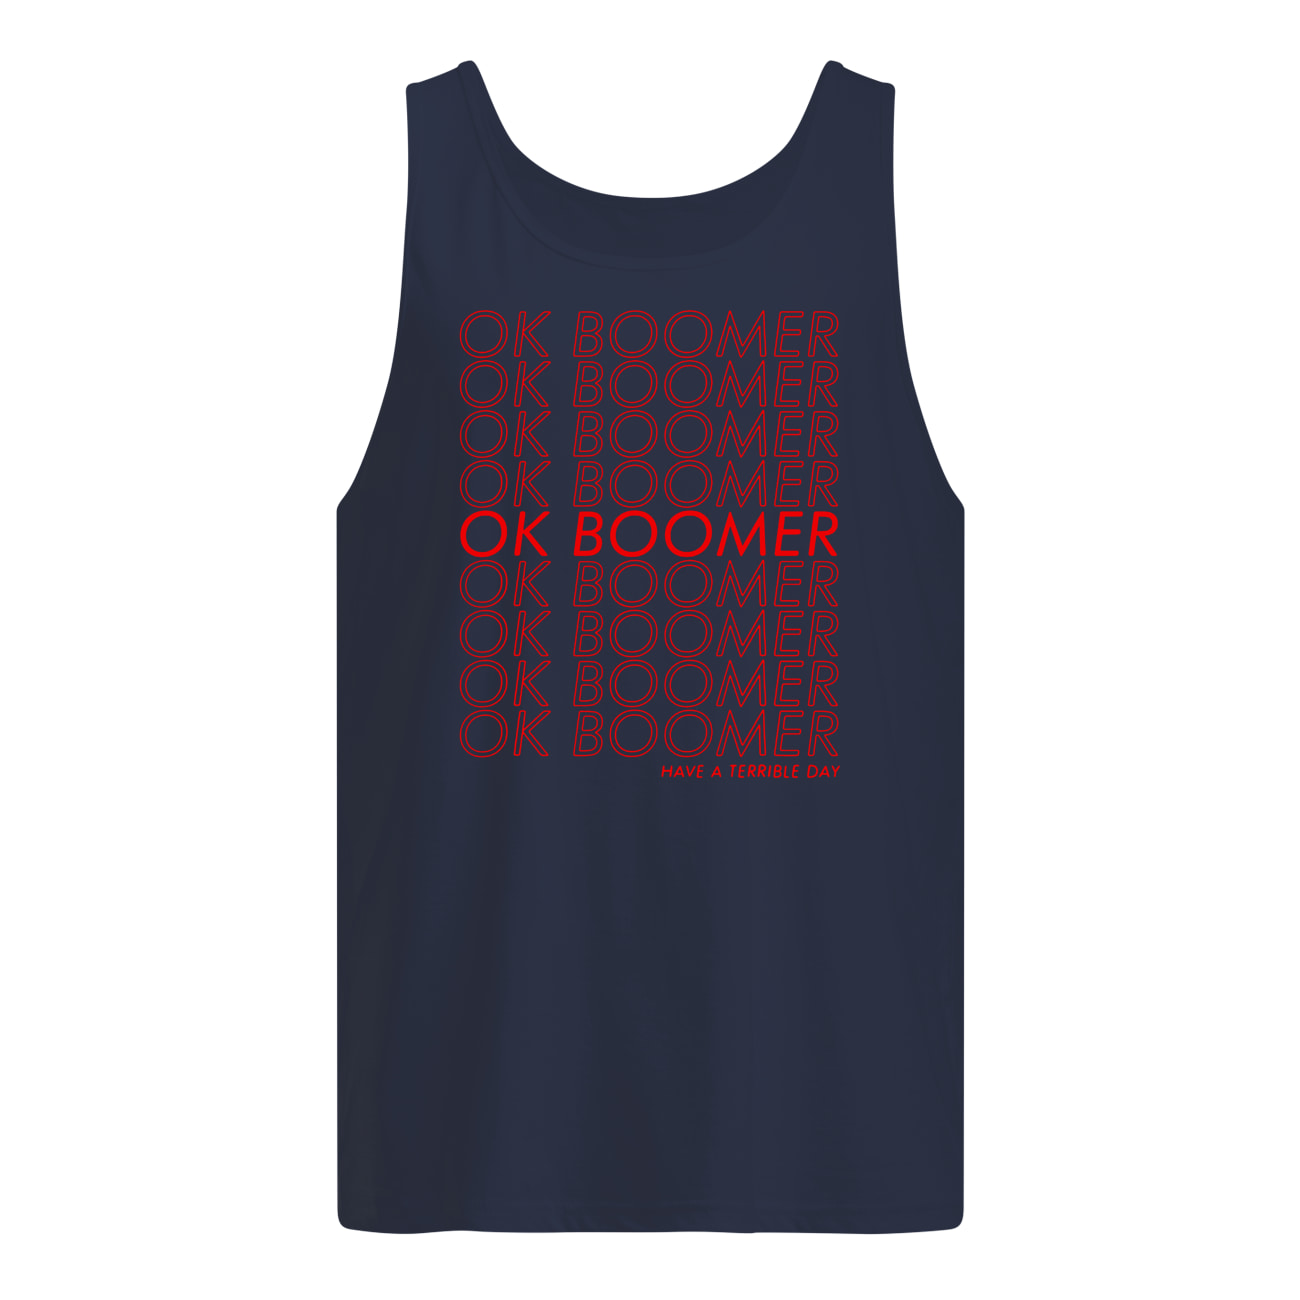 Ok boomer have a terrible day tank top